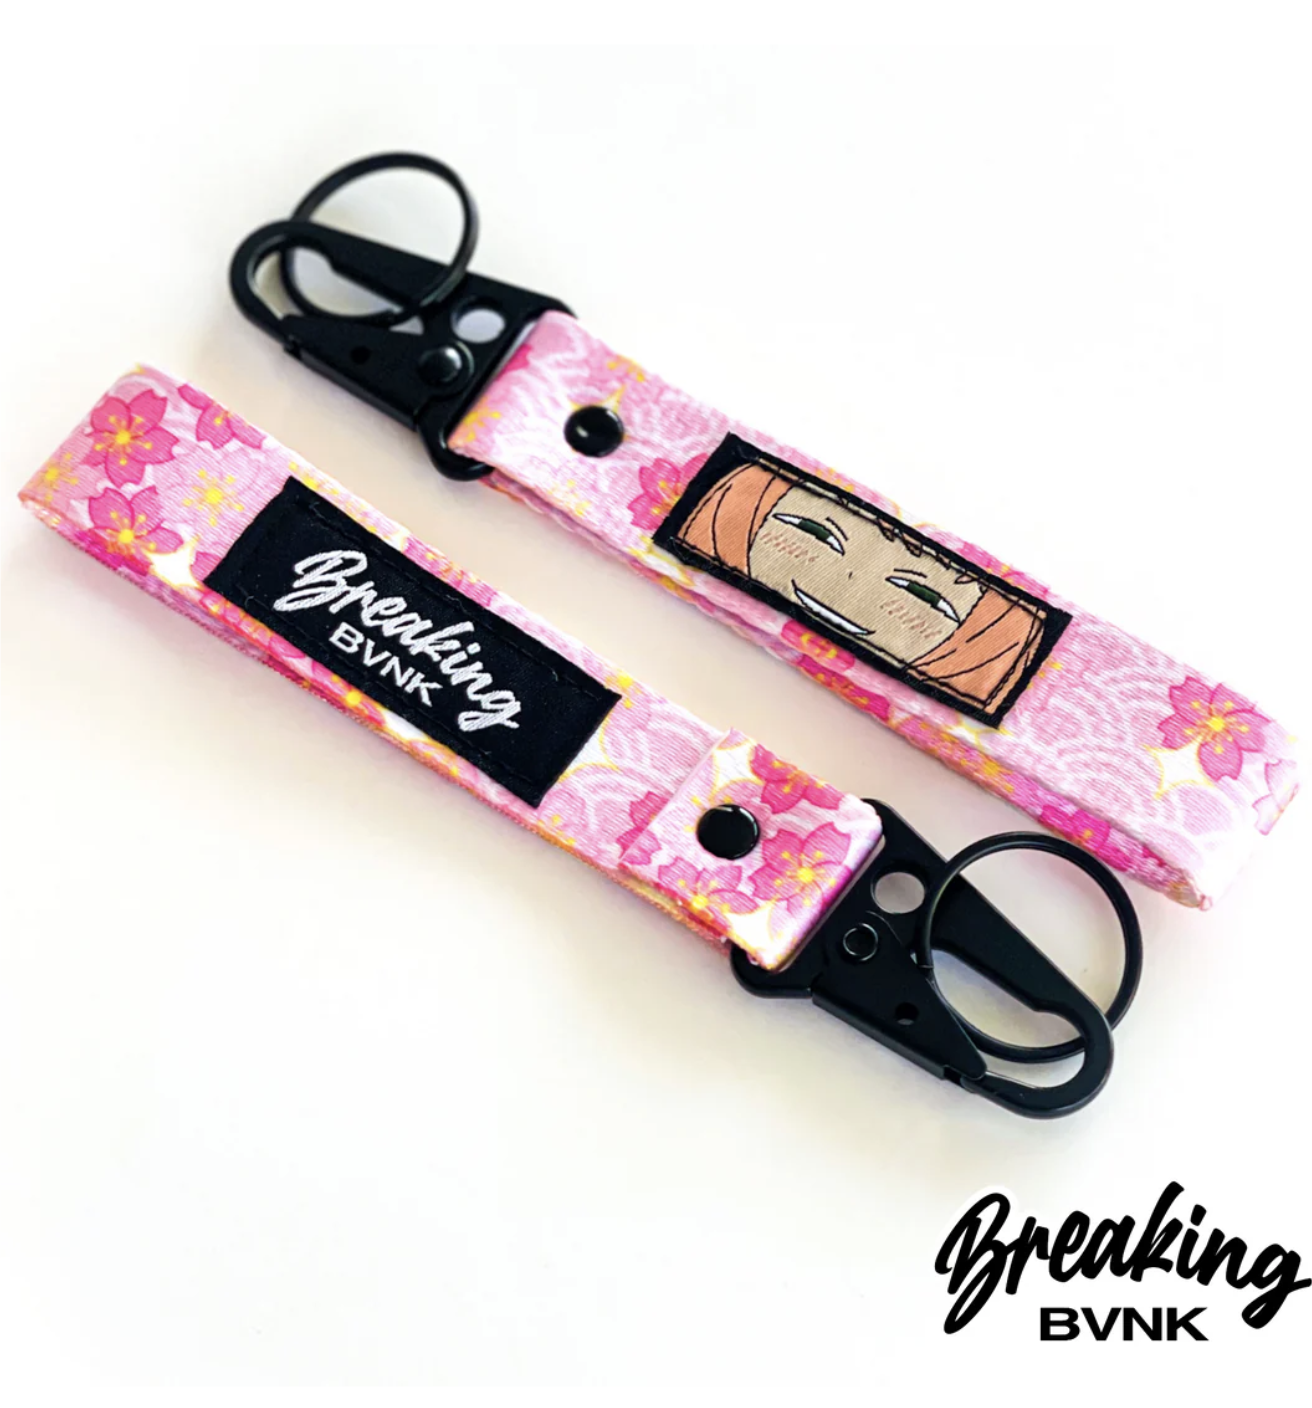 Two fabric lanyards with Anya print and key rings